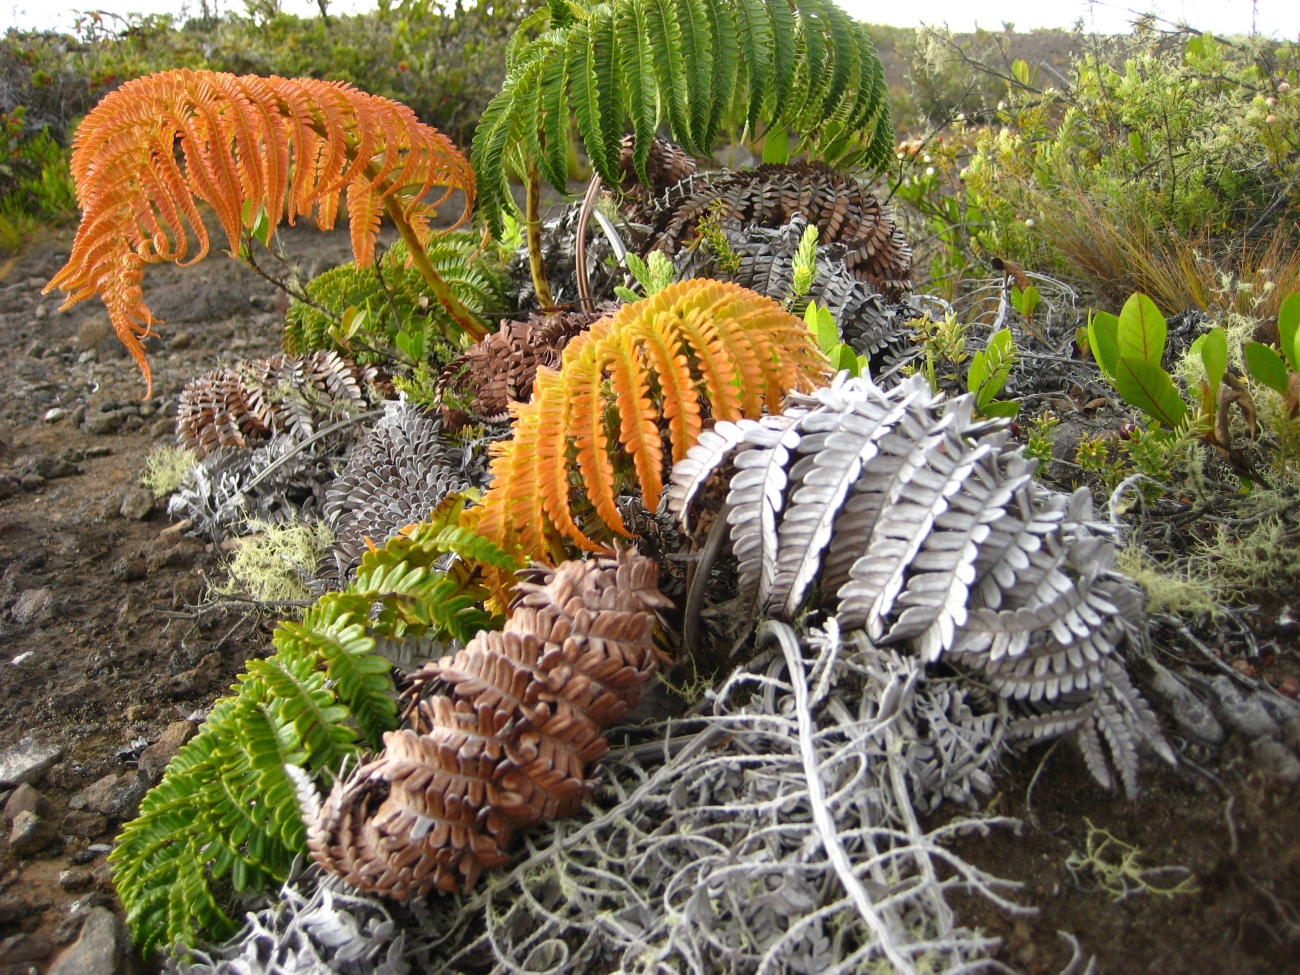 The amaumau fern (Sadleria cyathoides) which commonly grows in moist forestsand colonizes lava flows